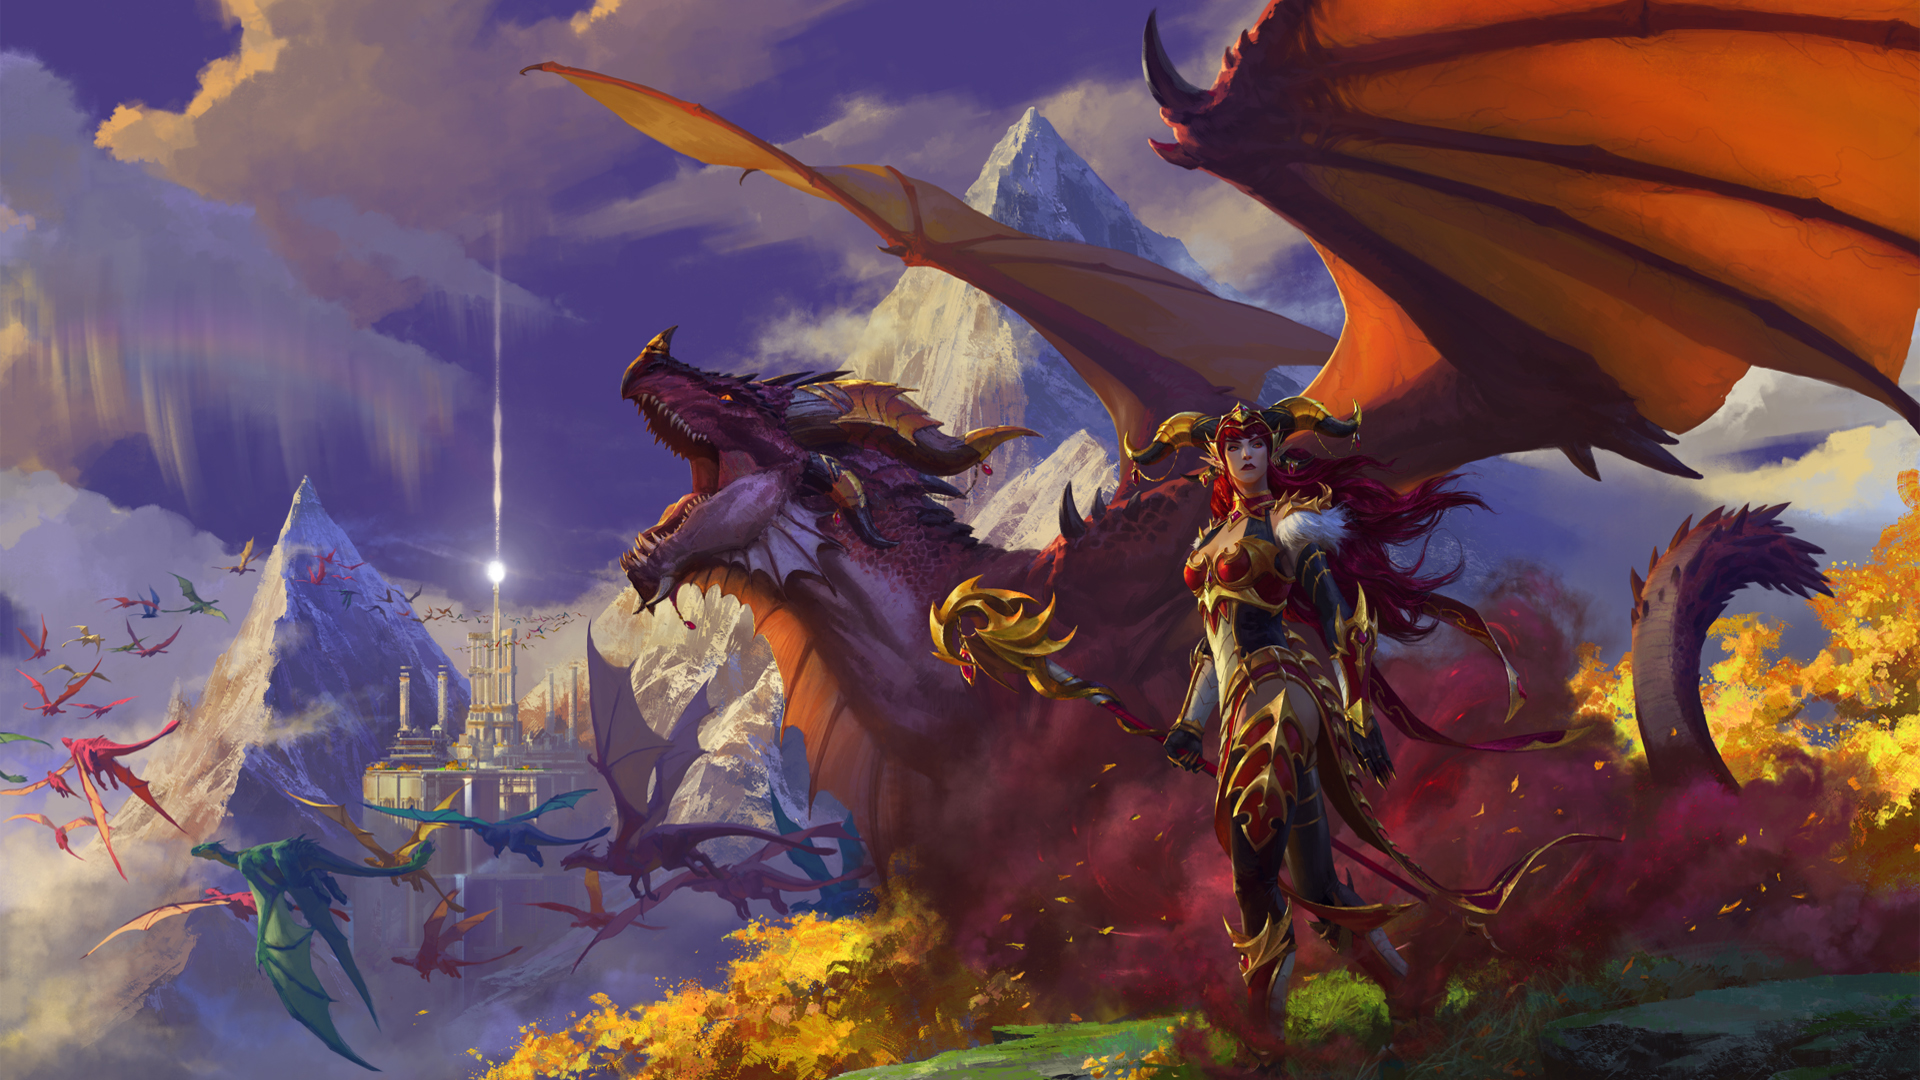  Here's what's coming in the WoW: Dragonflight pre-patch 